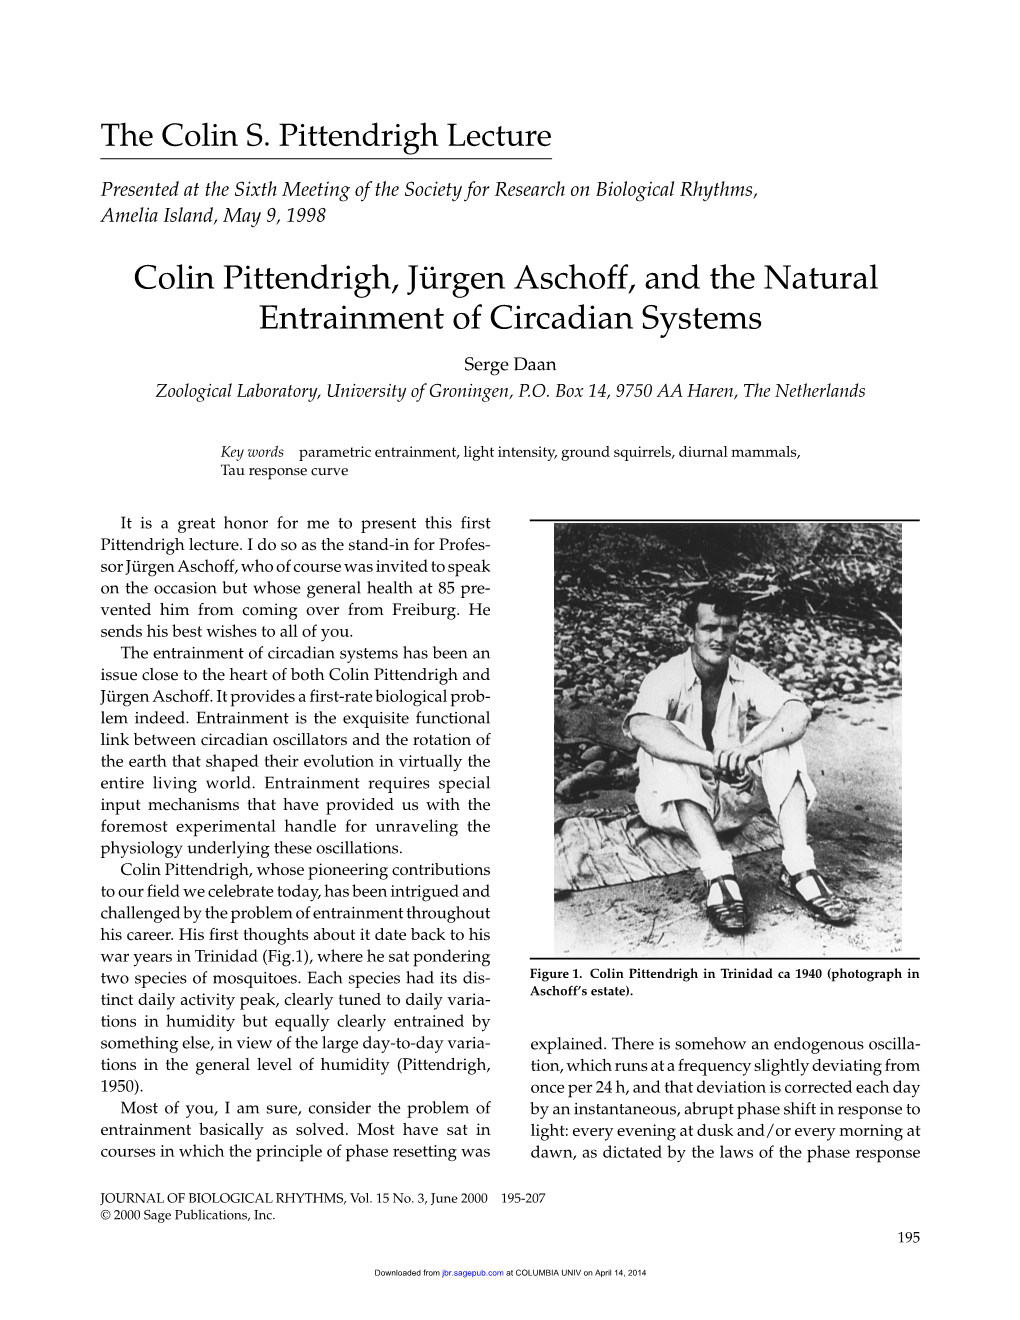 Colin Pittendrigh, Jürgen Aschoff, and the Natural Entrainment of Circadian Systems